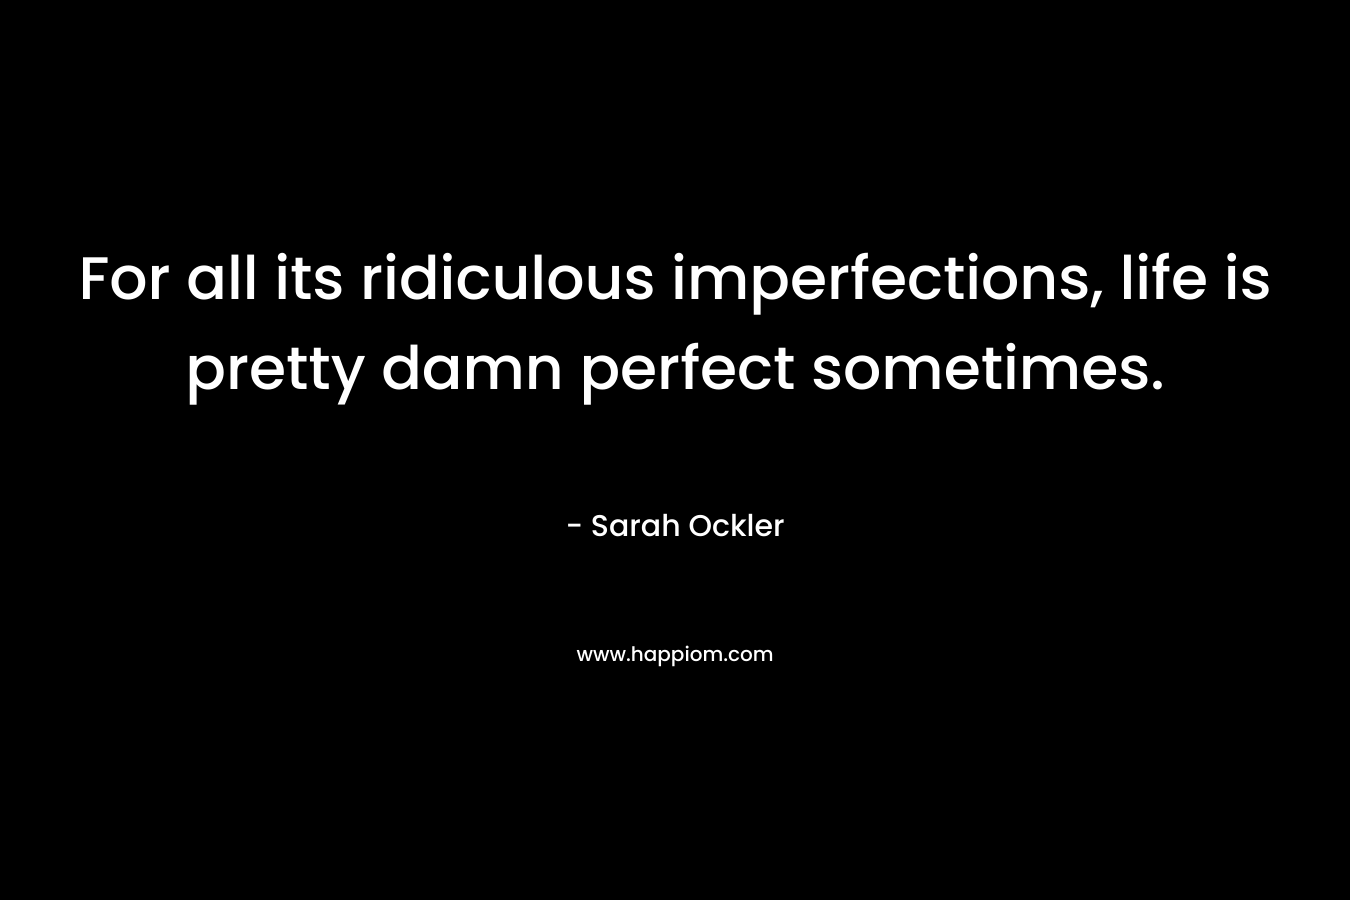 For all its ridiculous imperfections, life is pretty damn perfect sometimes. – Sarah Ockler